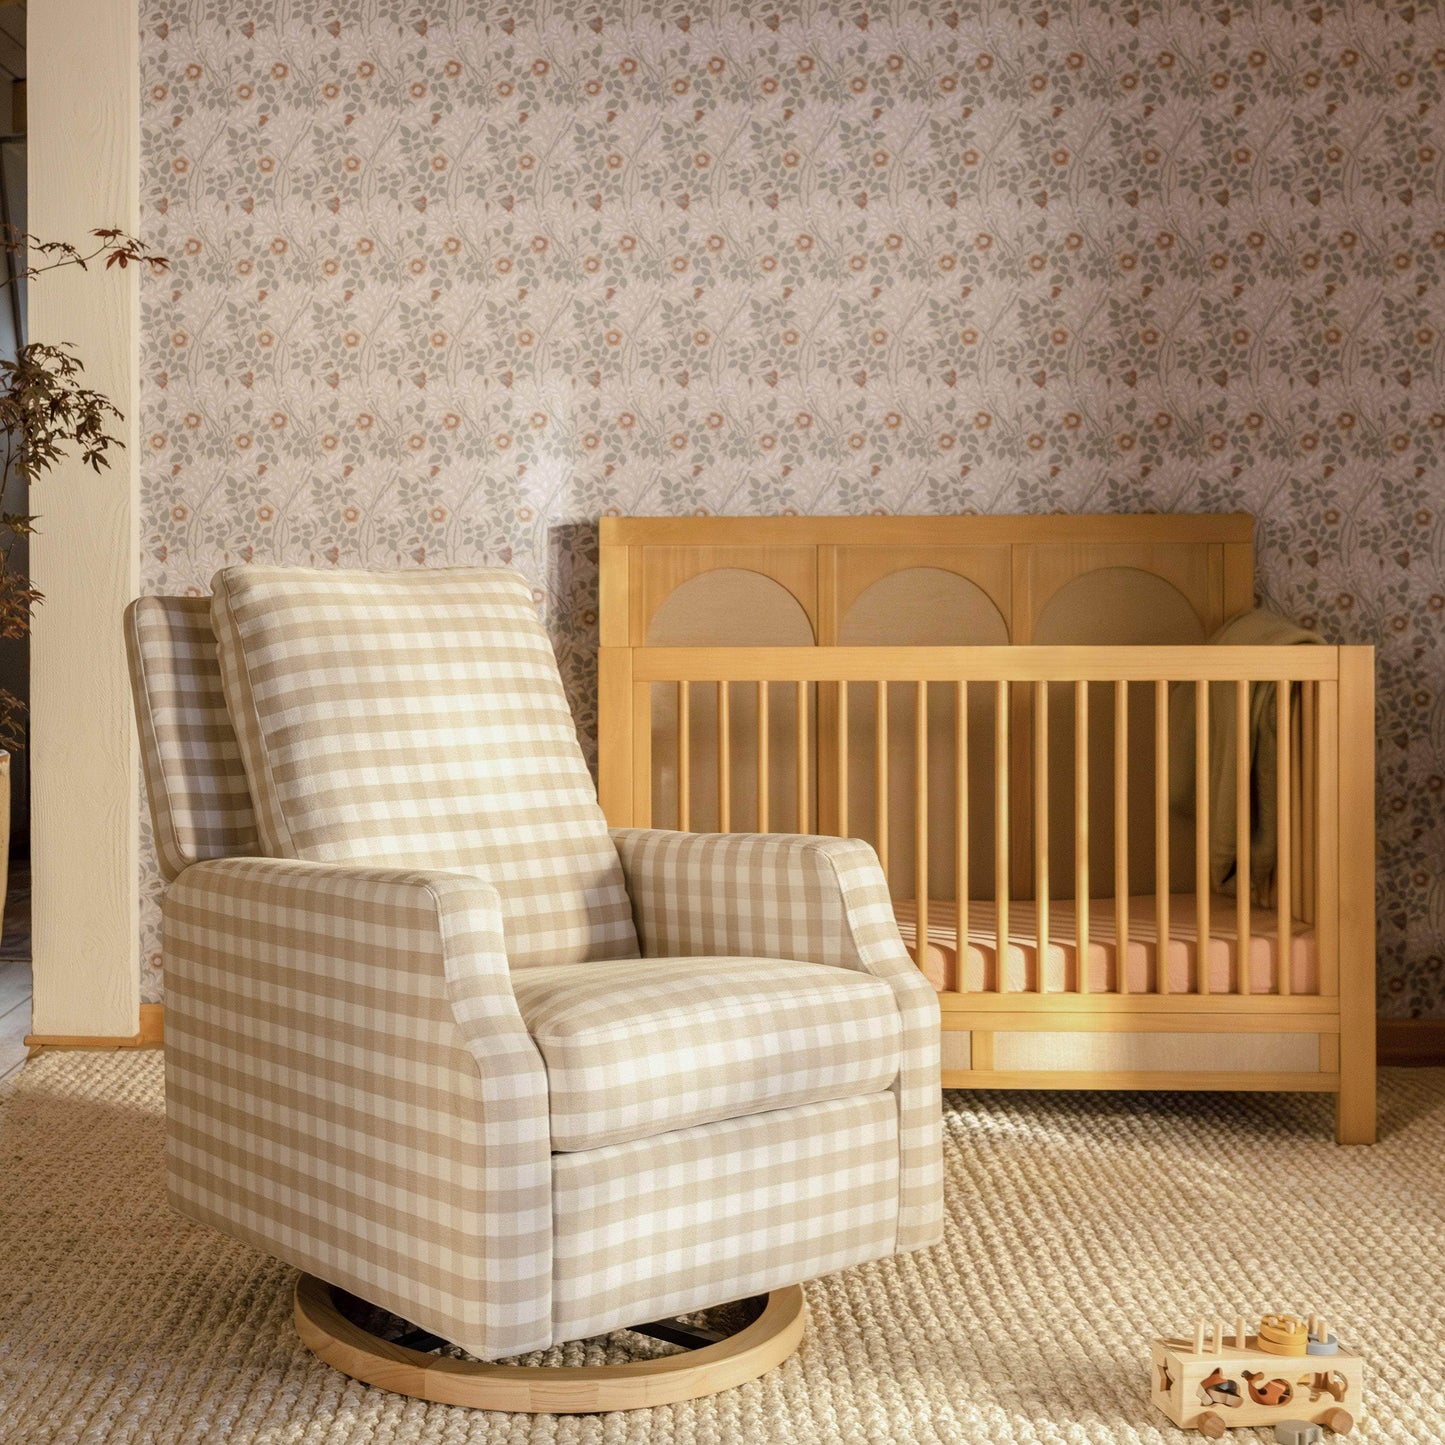 M22287TGHLB,Crewe Recliner and Swivel Glider in Tan Gingham with Light Wood Base